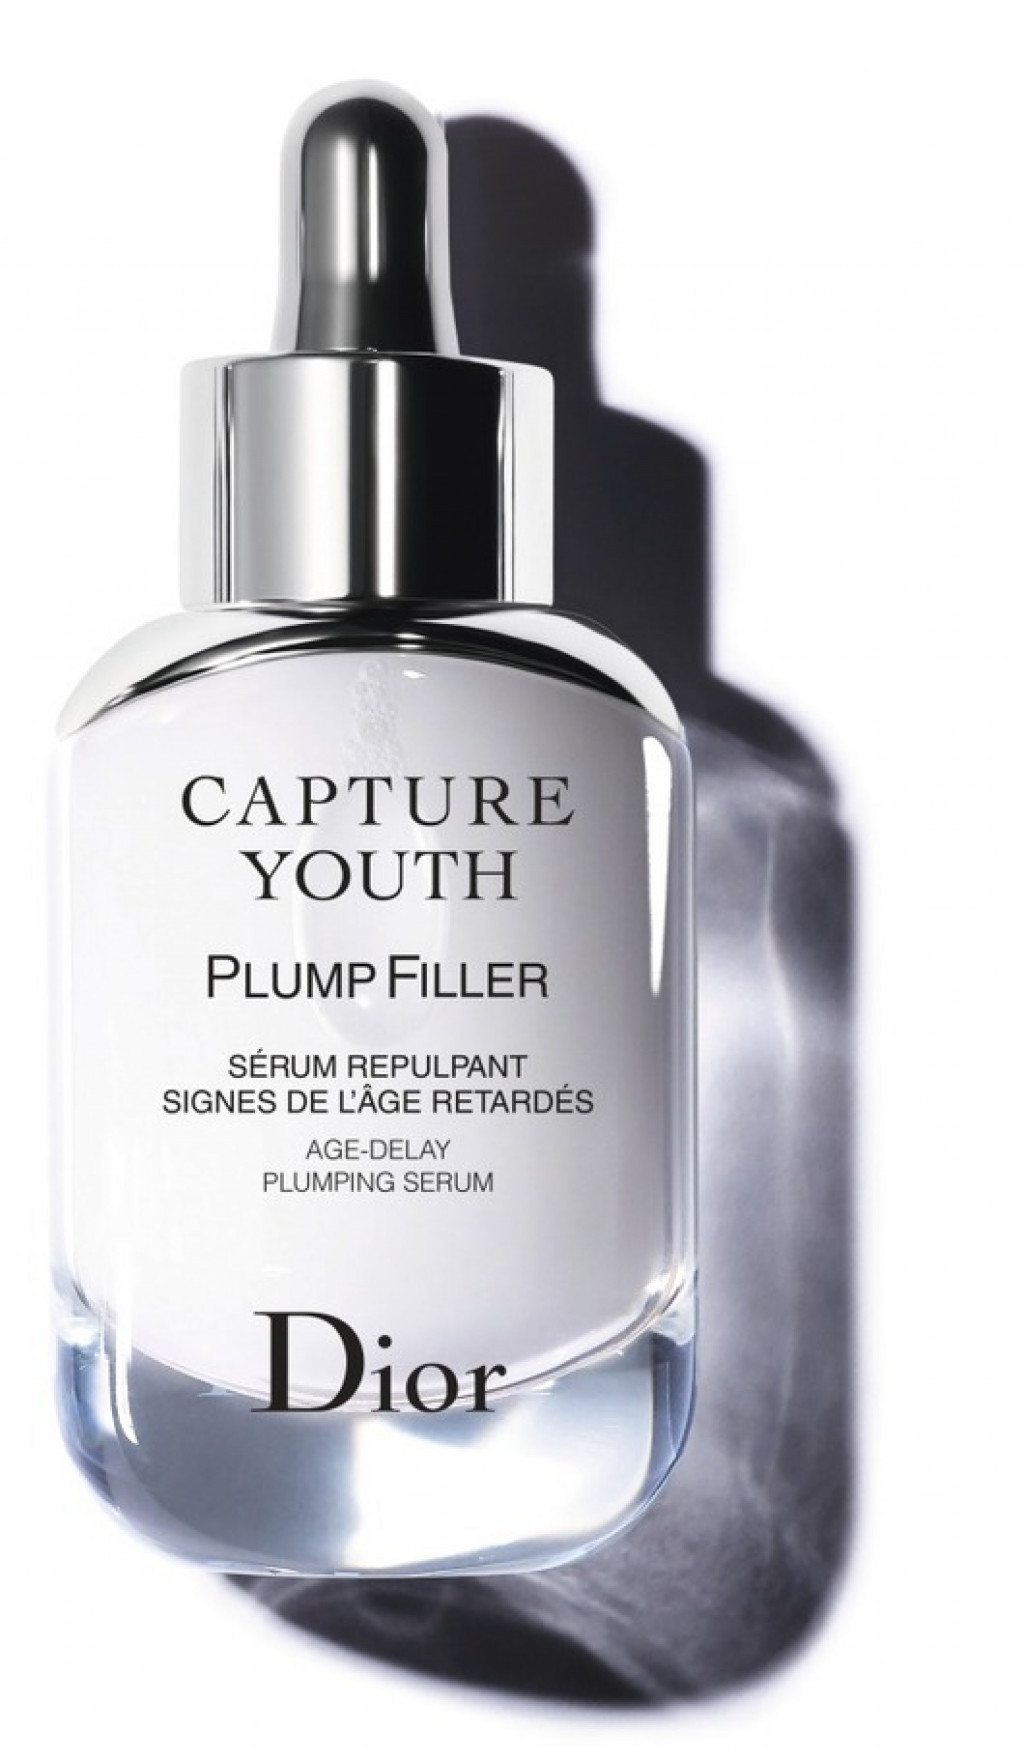 Christian Dior Capture Youth PLUMP FILLER Age Delay Plumping SERUM 10 oz   eBay